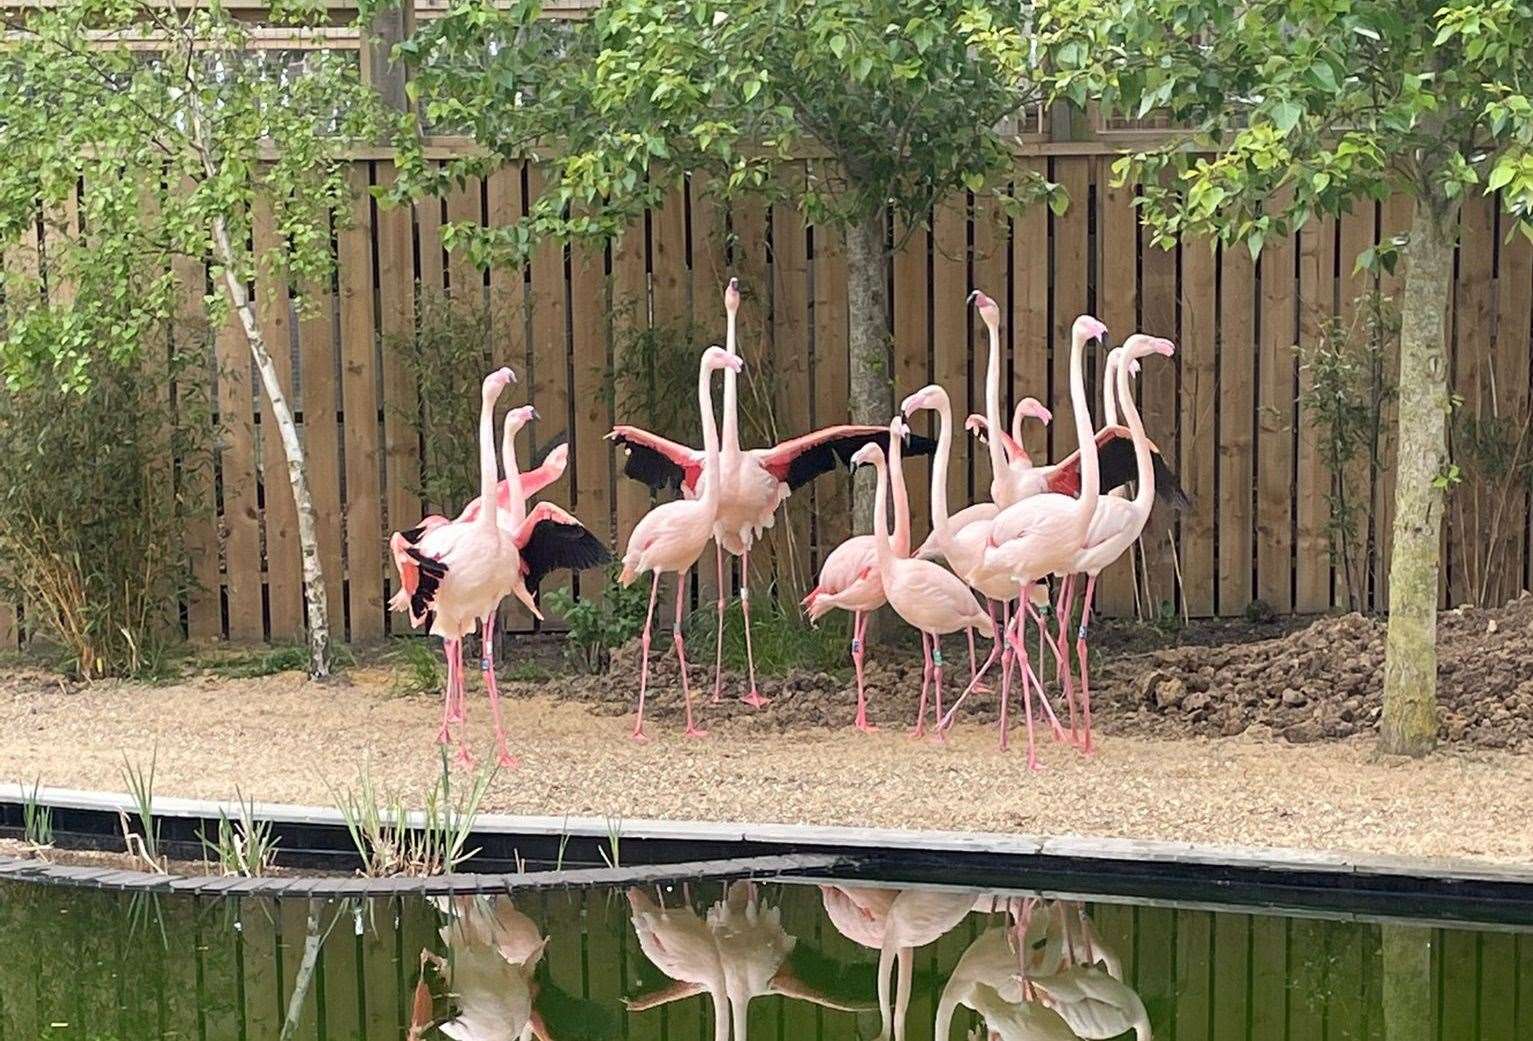 The flamingos have been in their inside enclosure since last year. Picture: The Fenn Bell Conservation Project